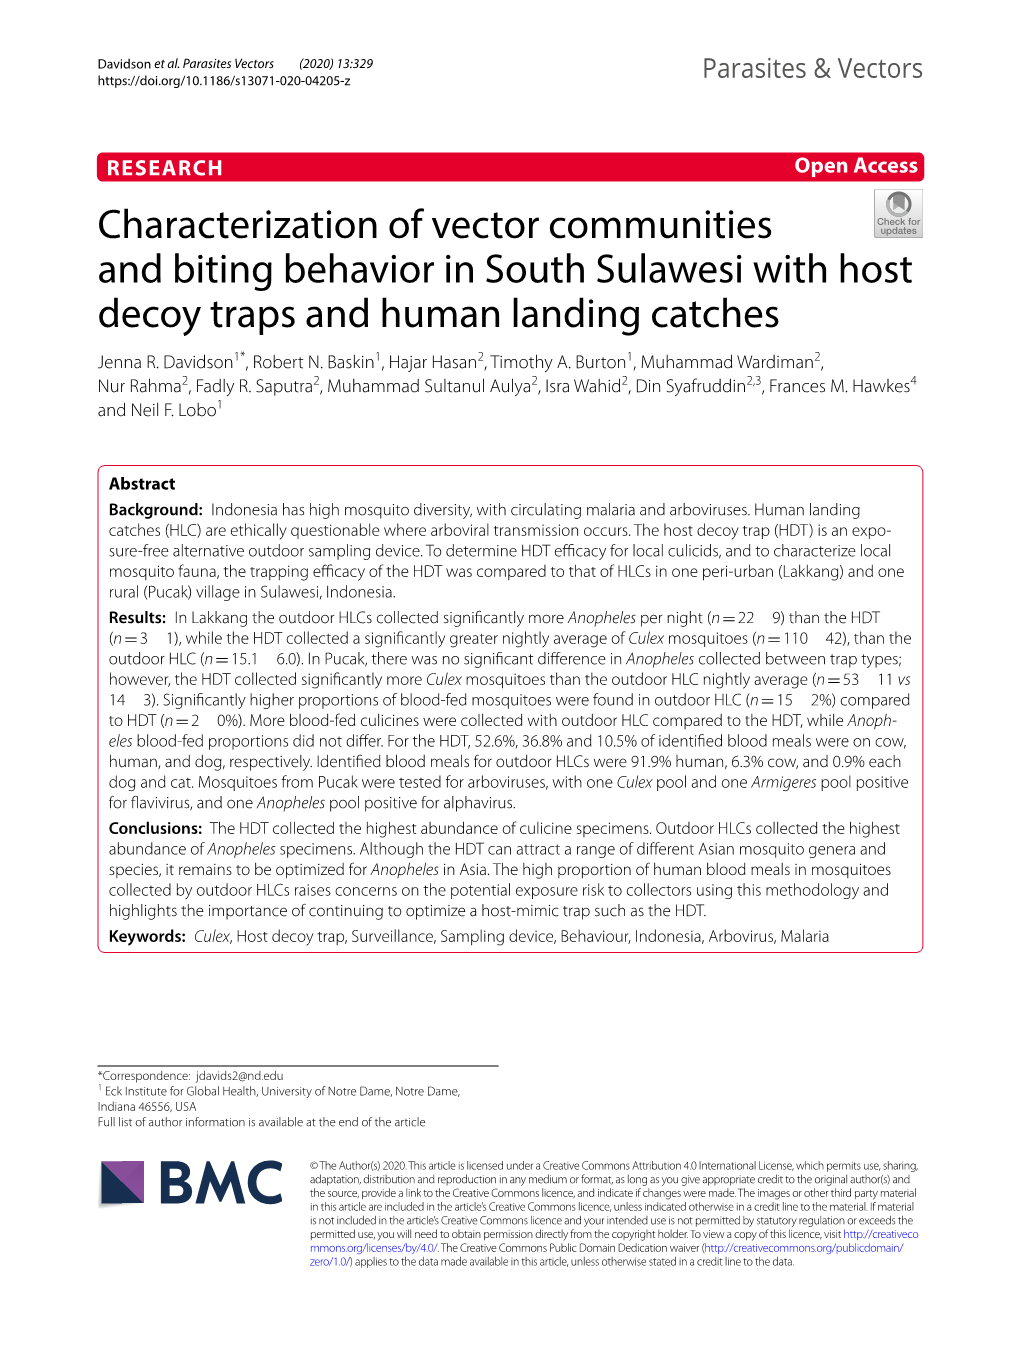 Characterization of Vector Communities and Biting Behavior in South Sulawesi with Host Decoy Traps and Human Landing Catches Jenna R